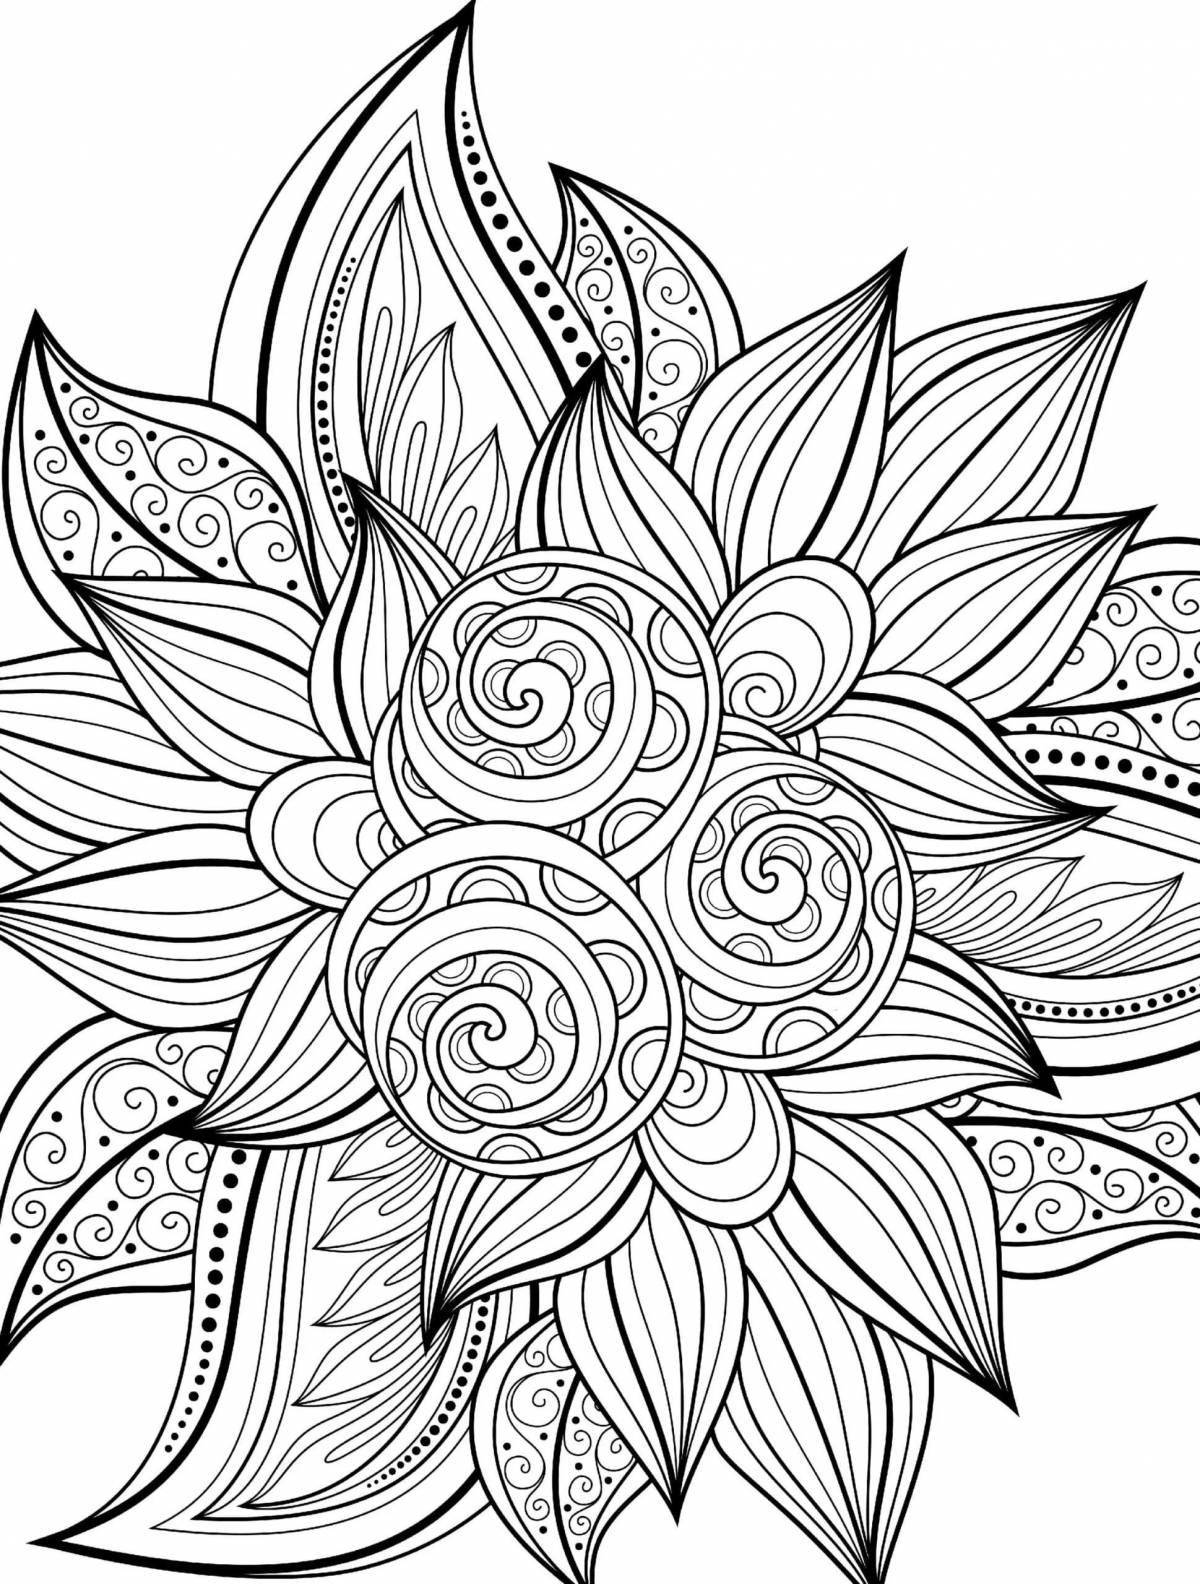 Animated coloring sheet